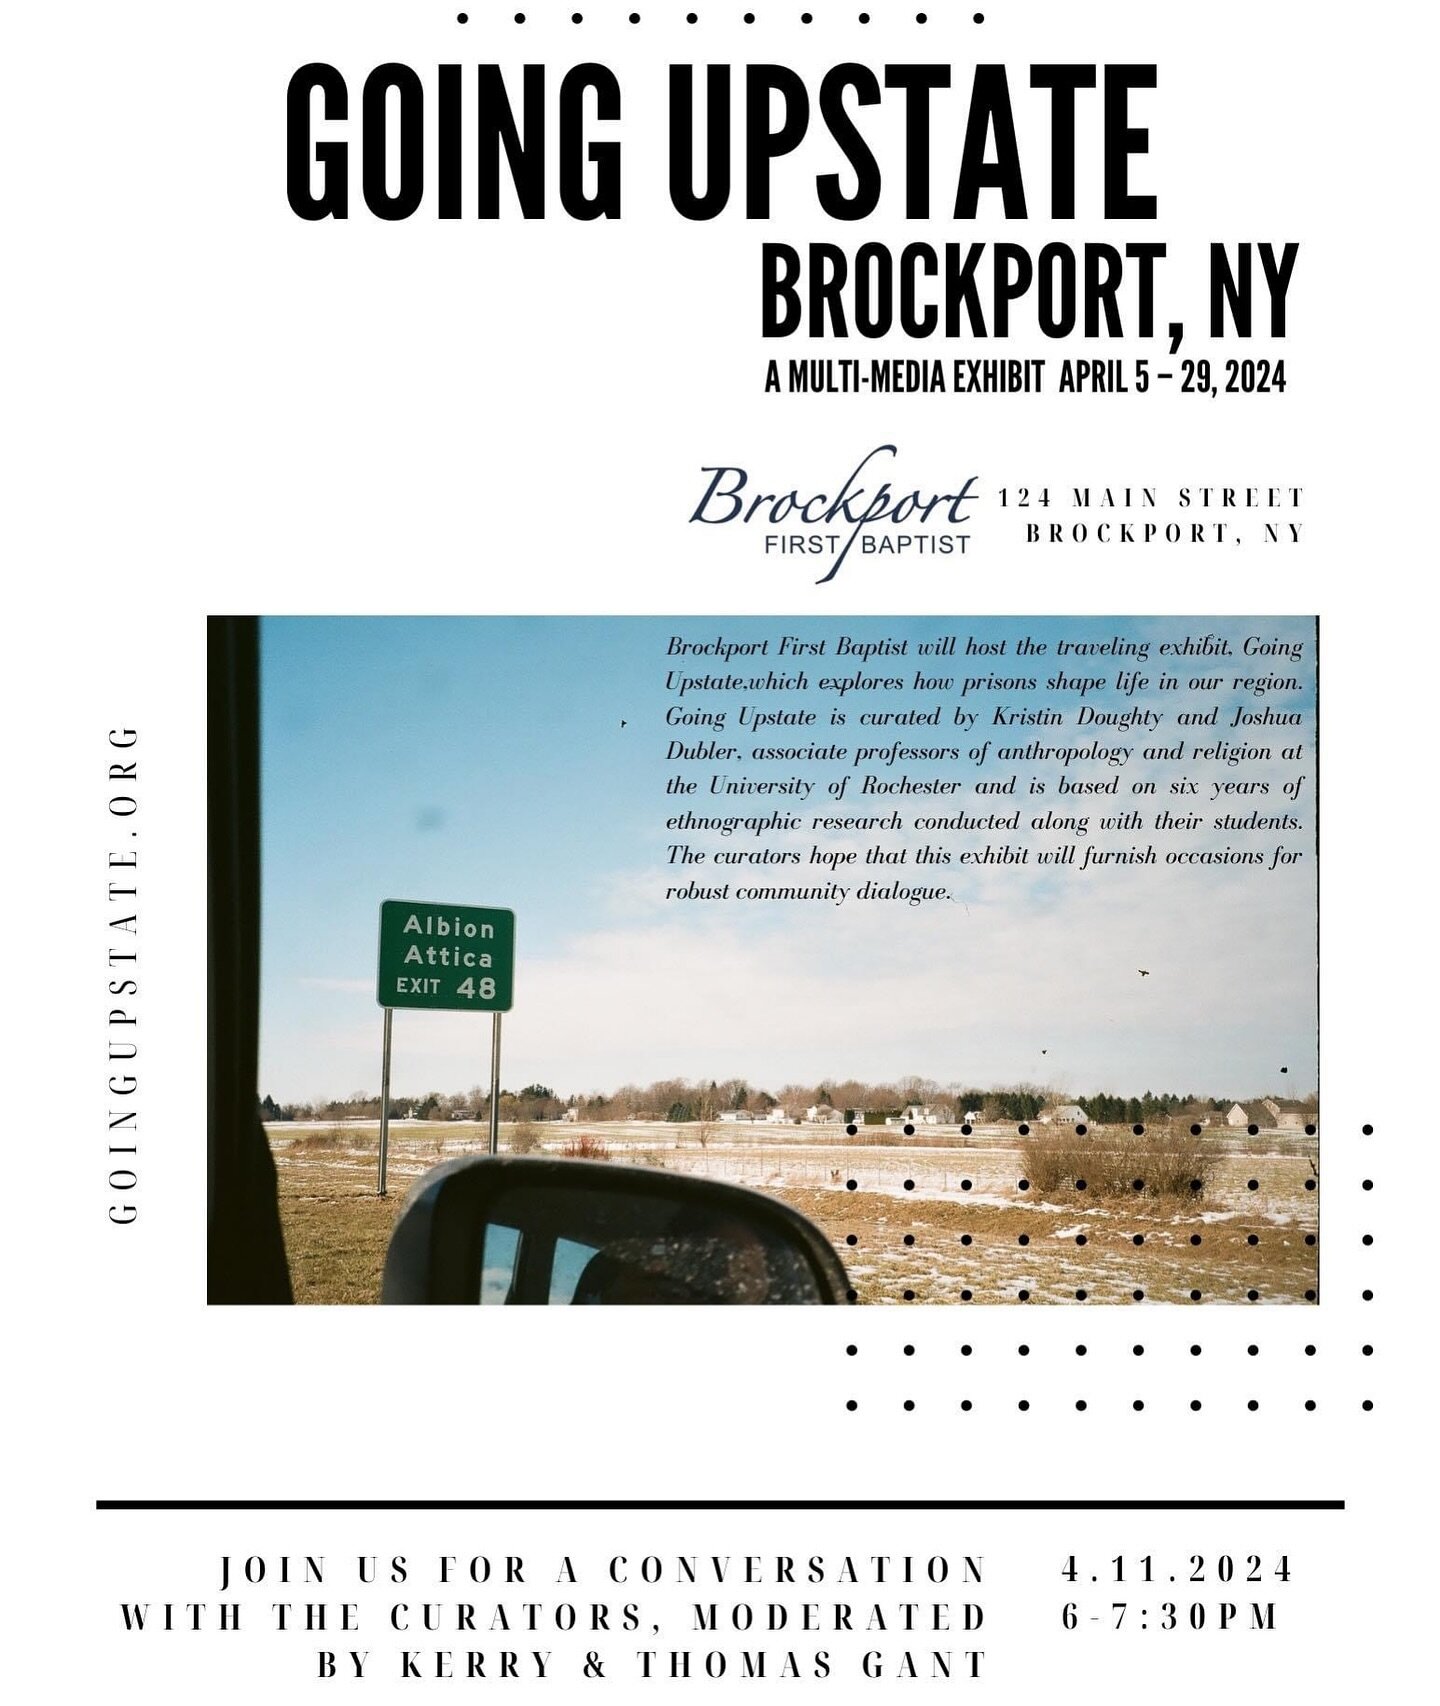 Join us on April 11th at 6:00pm for converstaions around the exhibit &ldquo;GOING UPSTATE&rdquo;.

The exhibit will be on display to view every Sunday before and after service between April 5th - 29th.